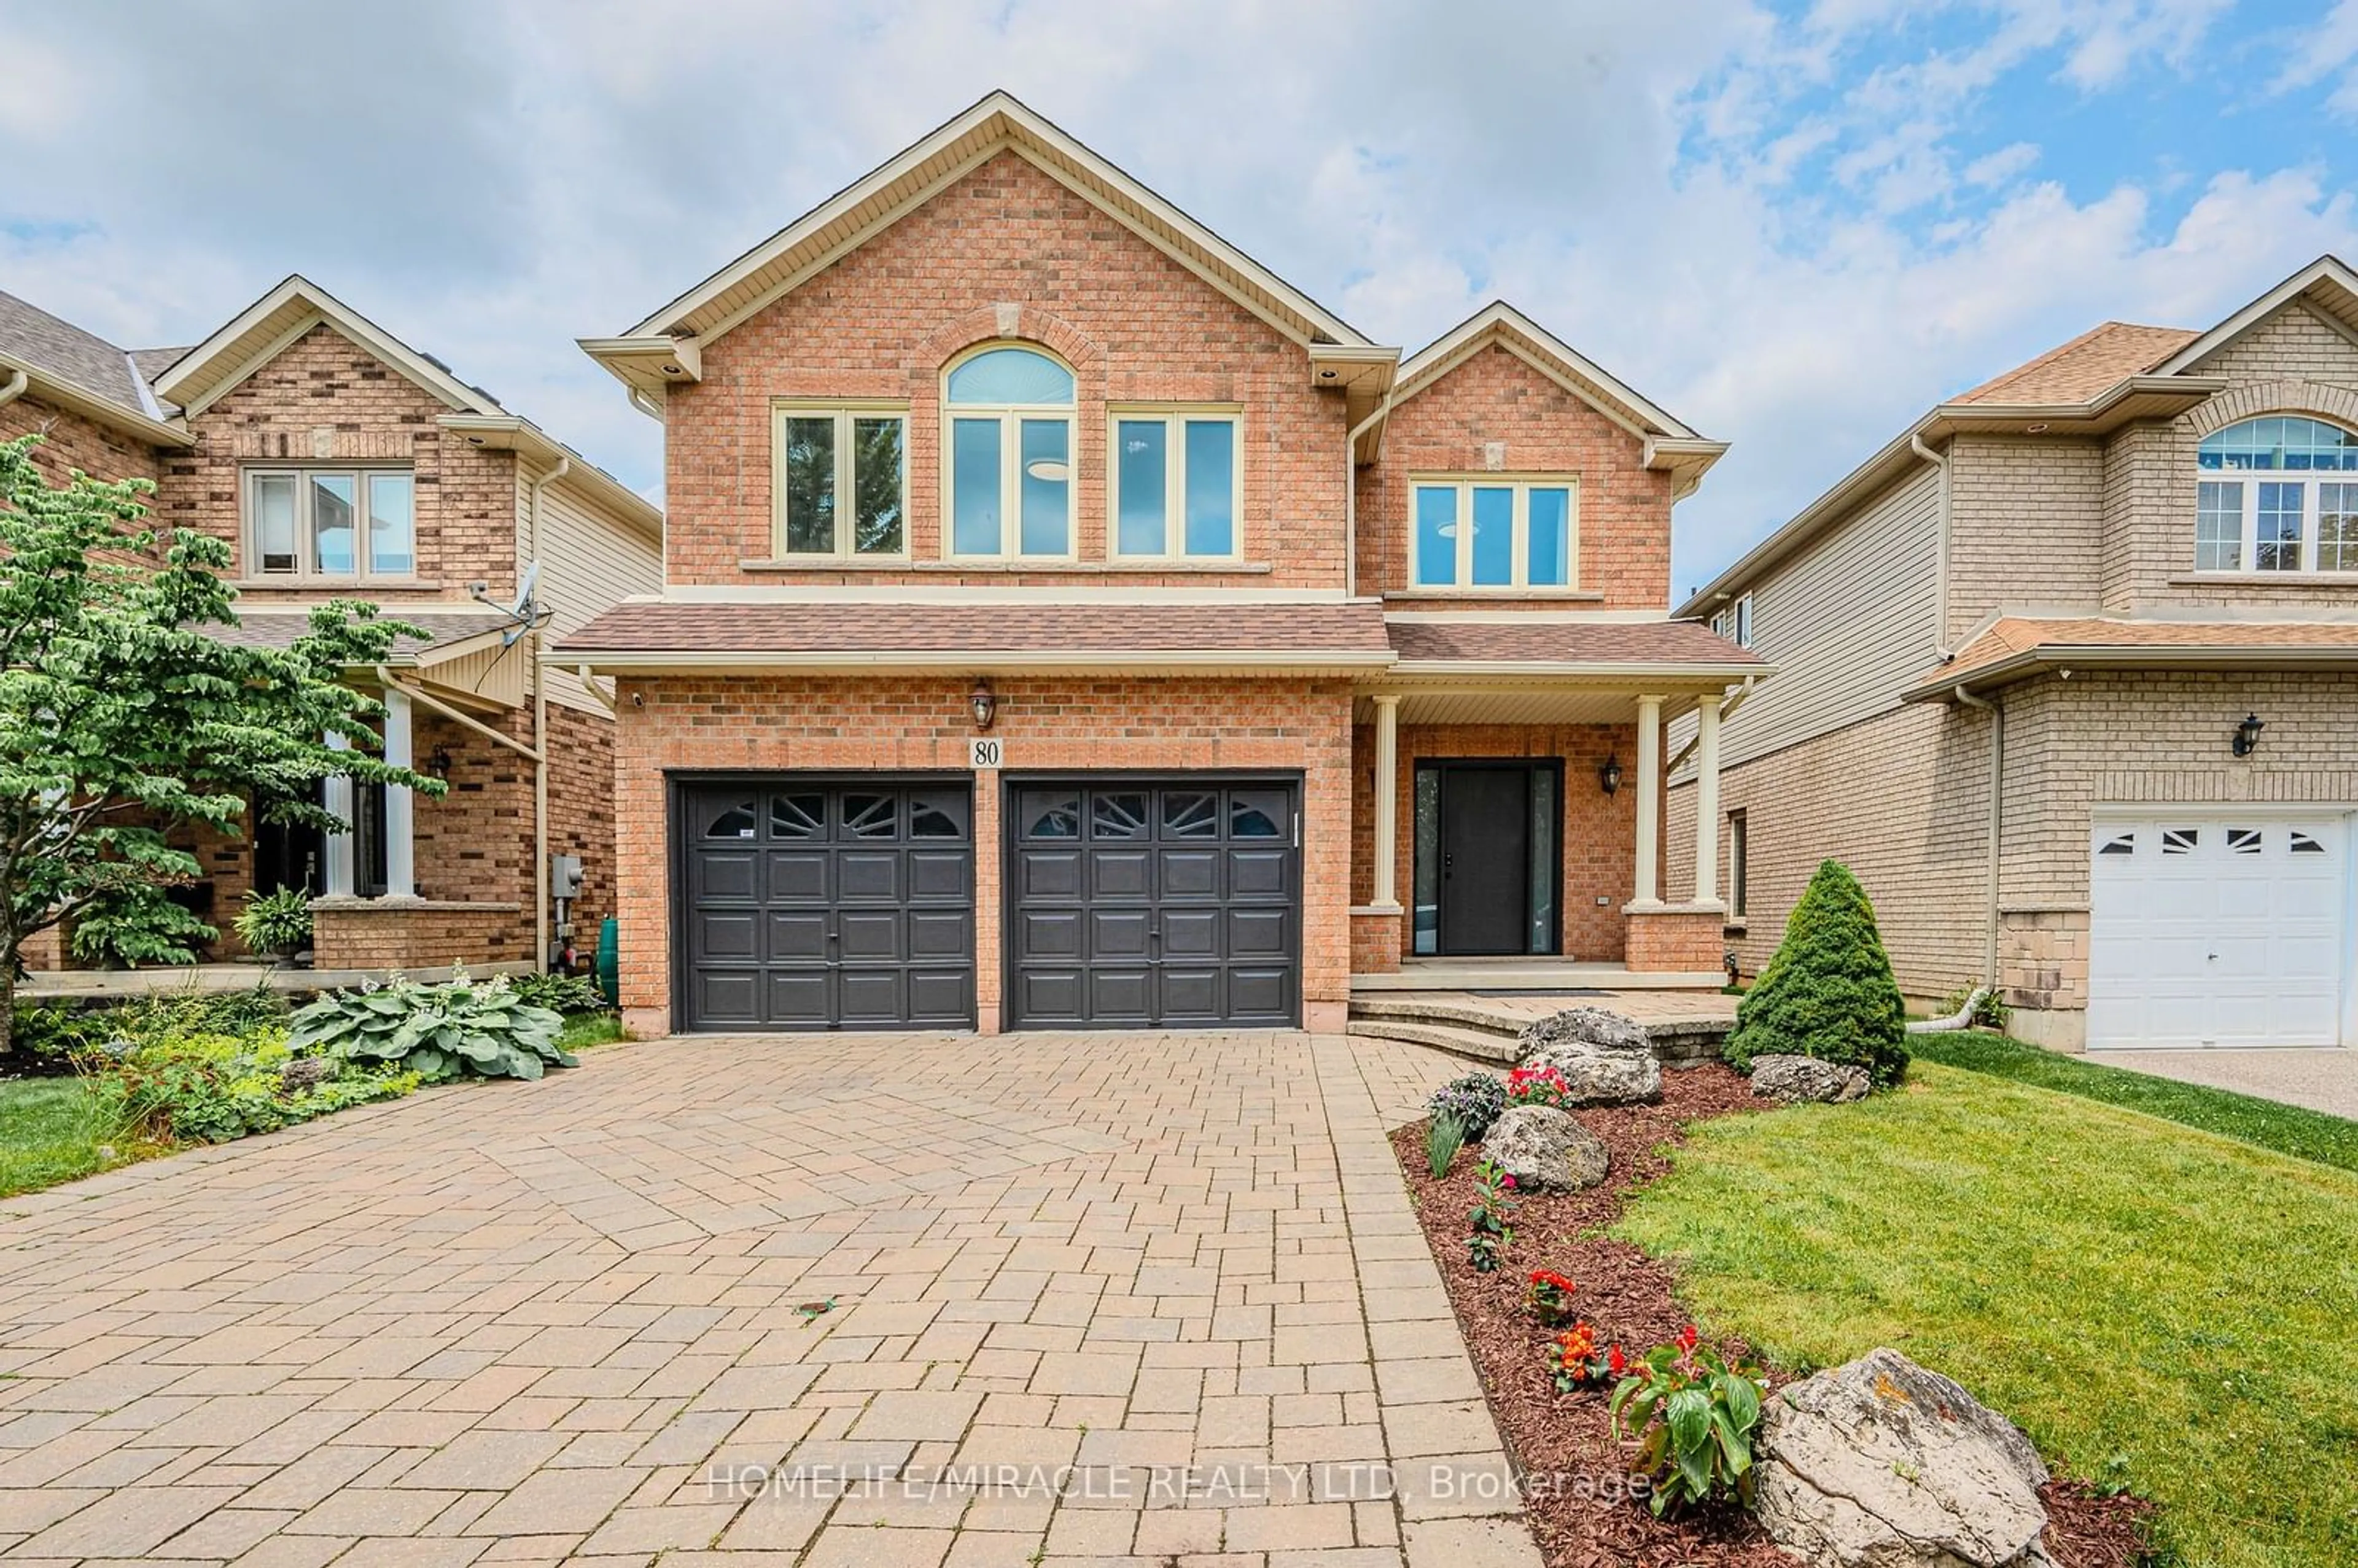 Home with brick exterior material for 80 Meadowbank Dr, Hamilton Ontario L9B 2Y1